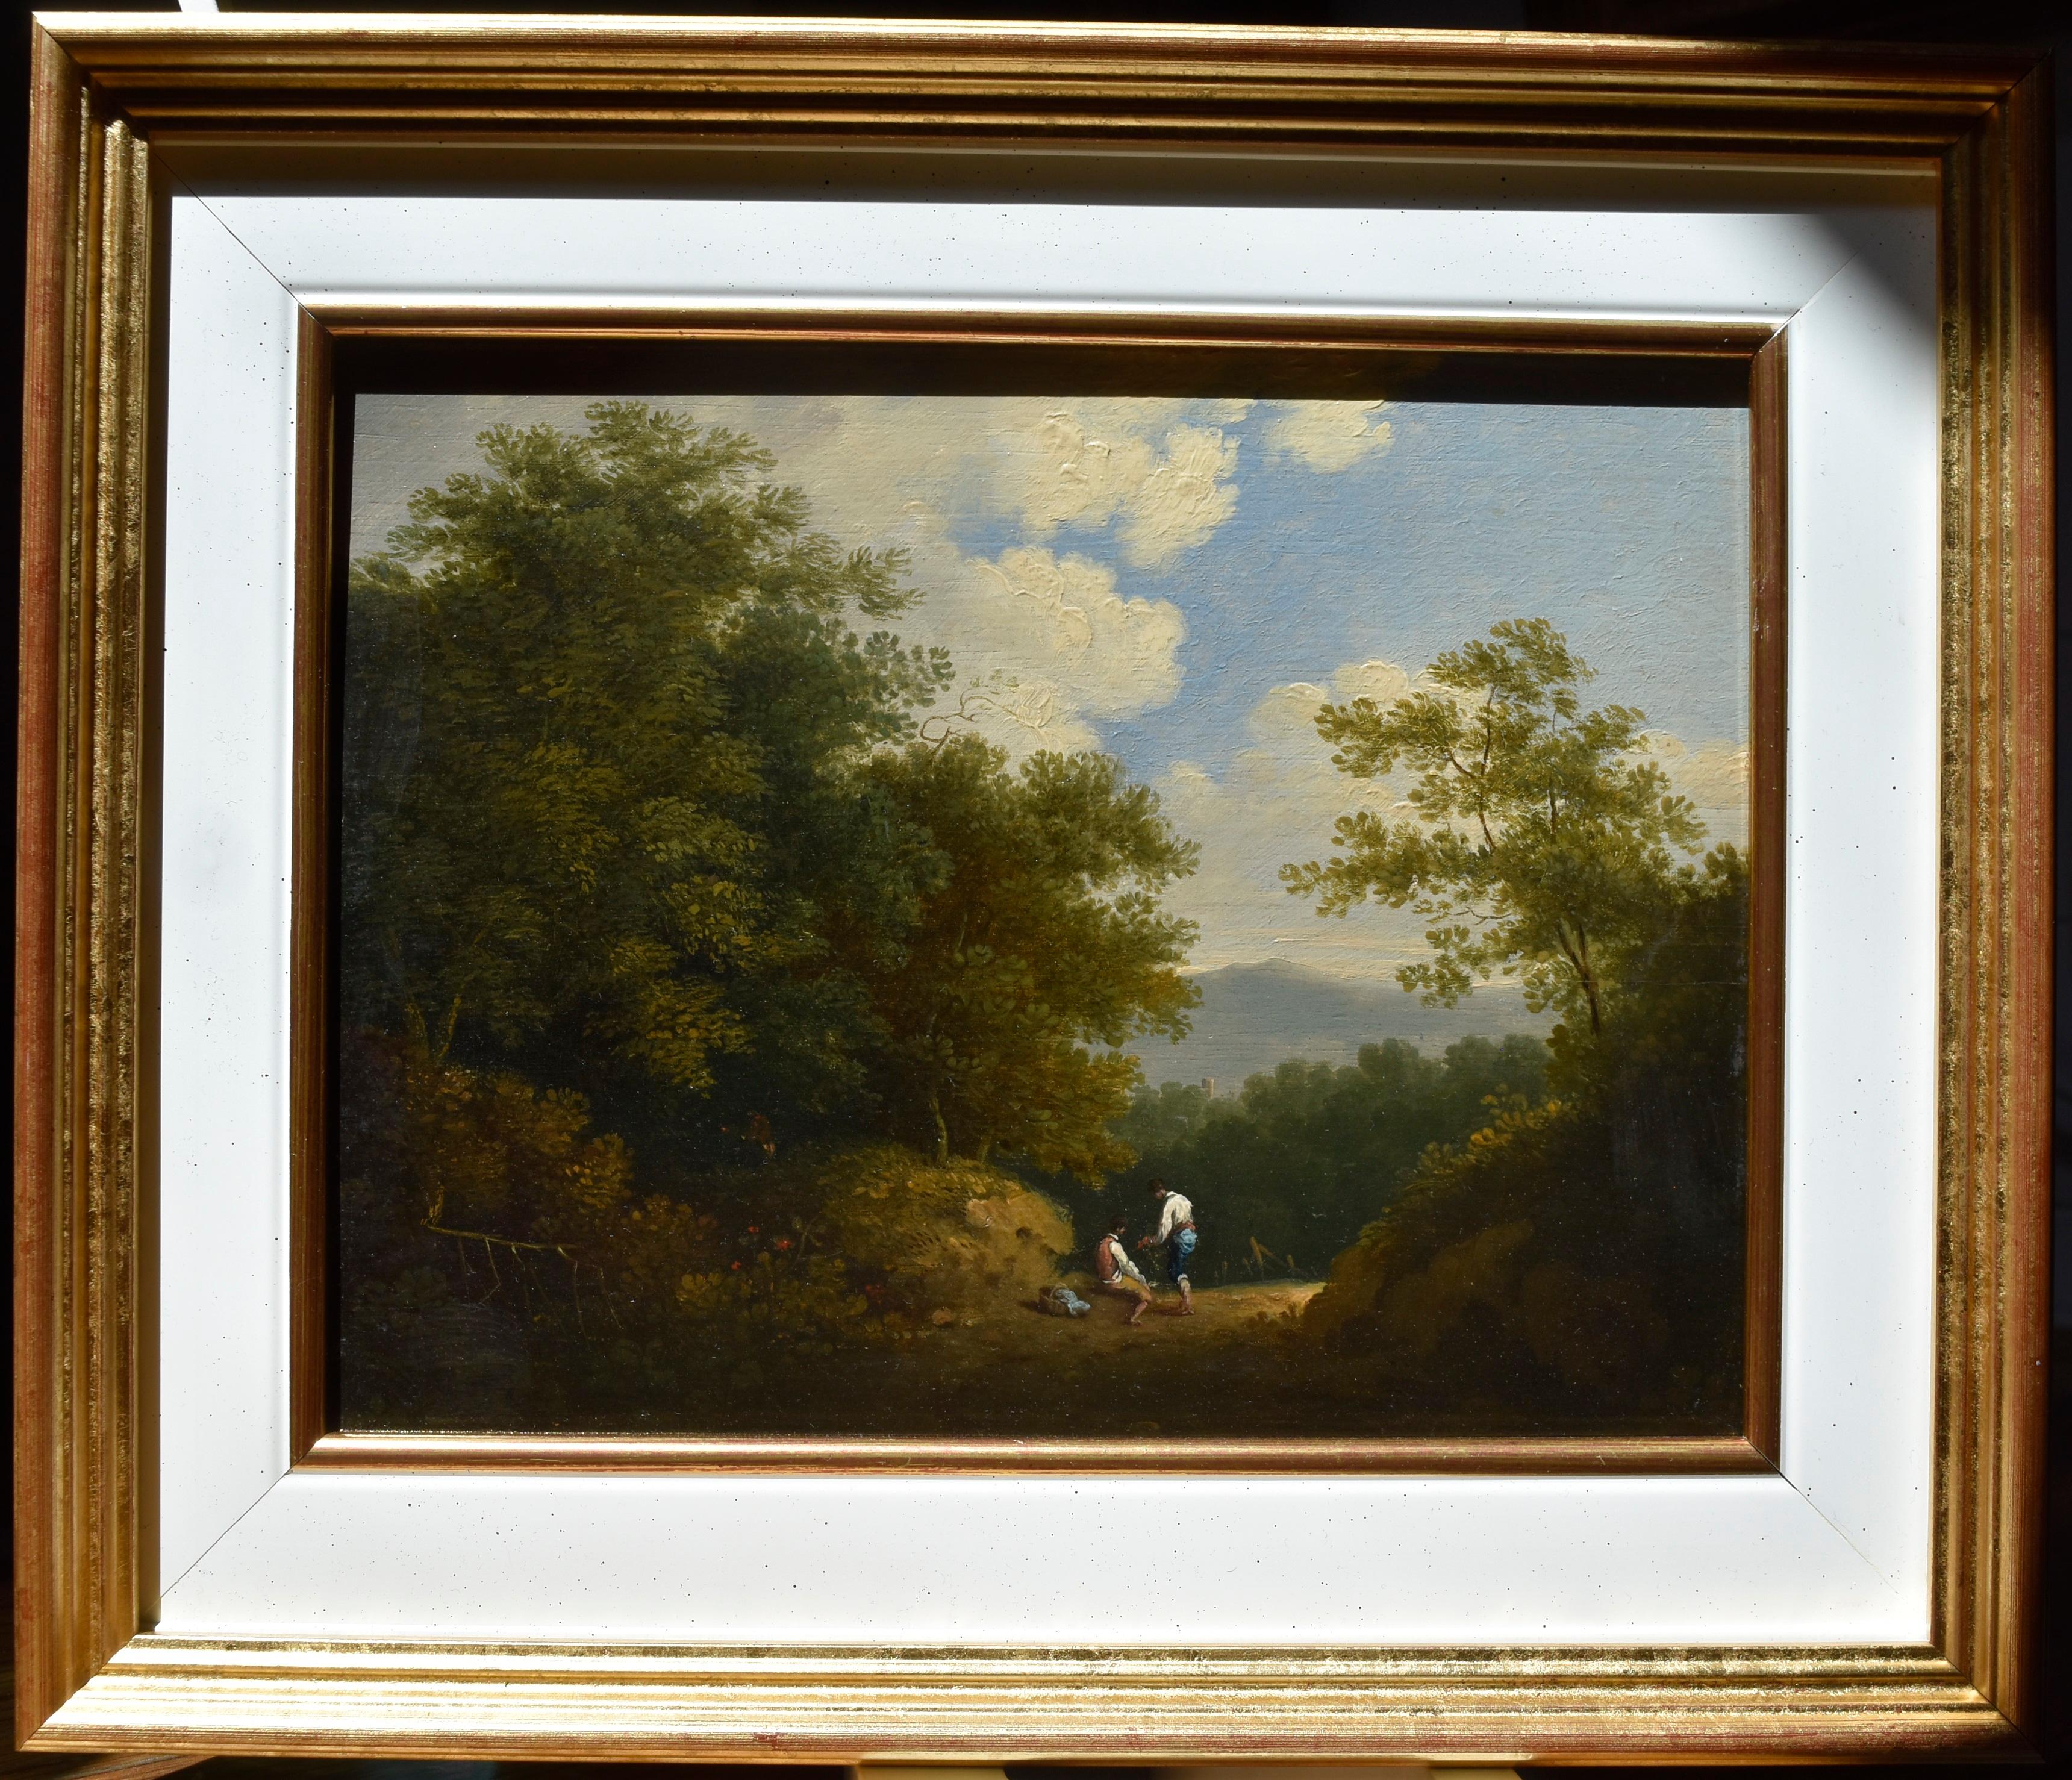 John Warwick Smith (1749-1831) 
Lanscape with two travellers, 
oil on panel
19.5 x 24.5 cm
Label with the name and adress (!) of the painter on the reverse
In a modern frame  : 29 x 34 cm

Smith was born at Irthington, near Carlisle, Cumberland, the